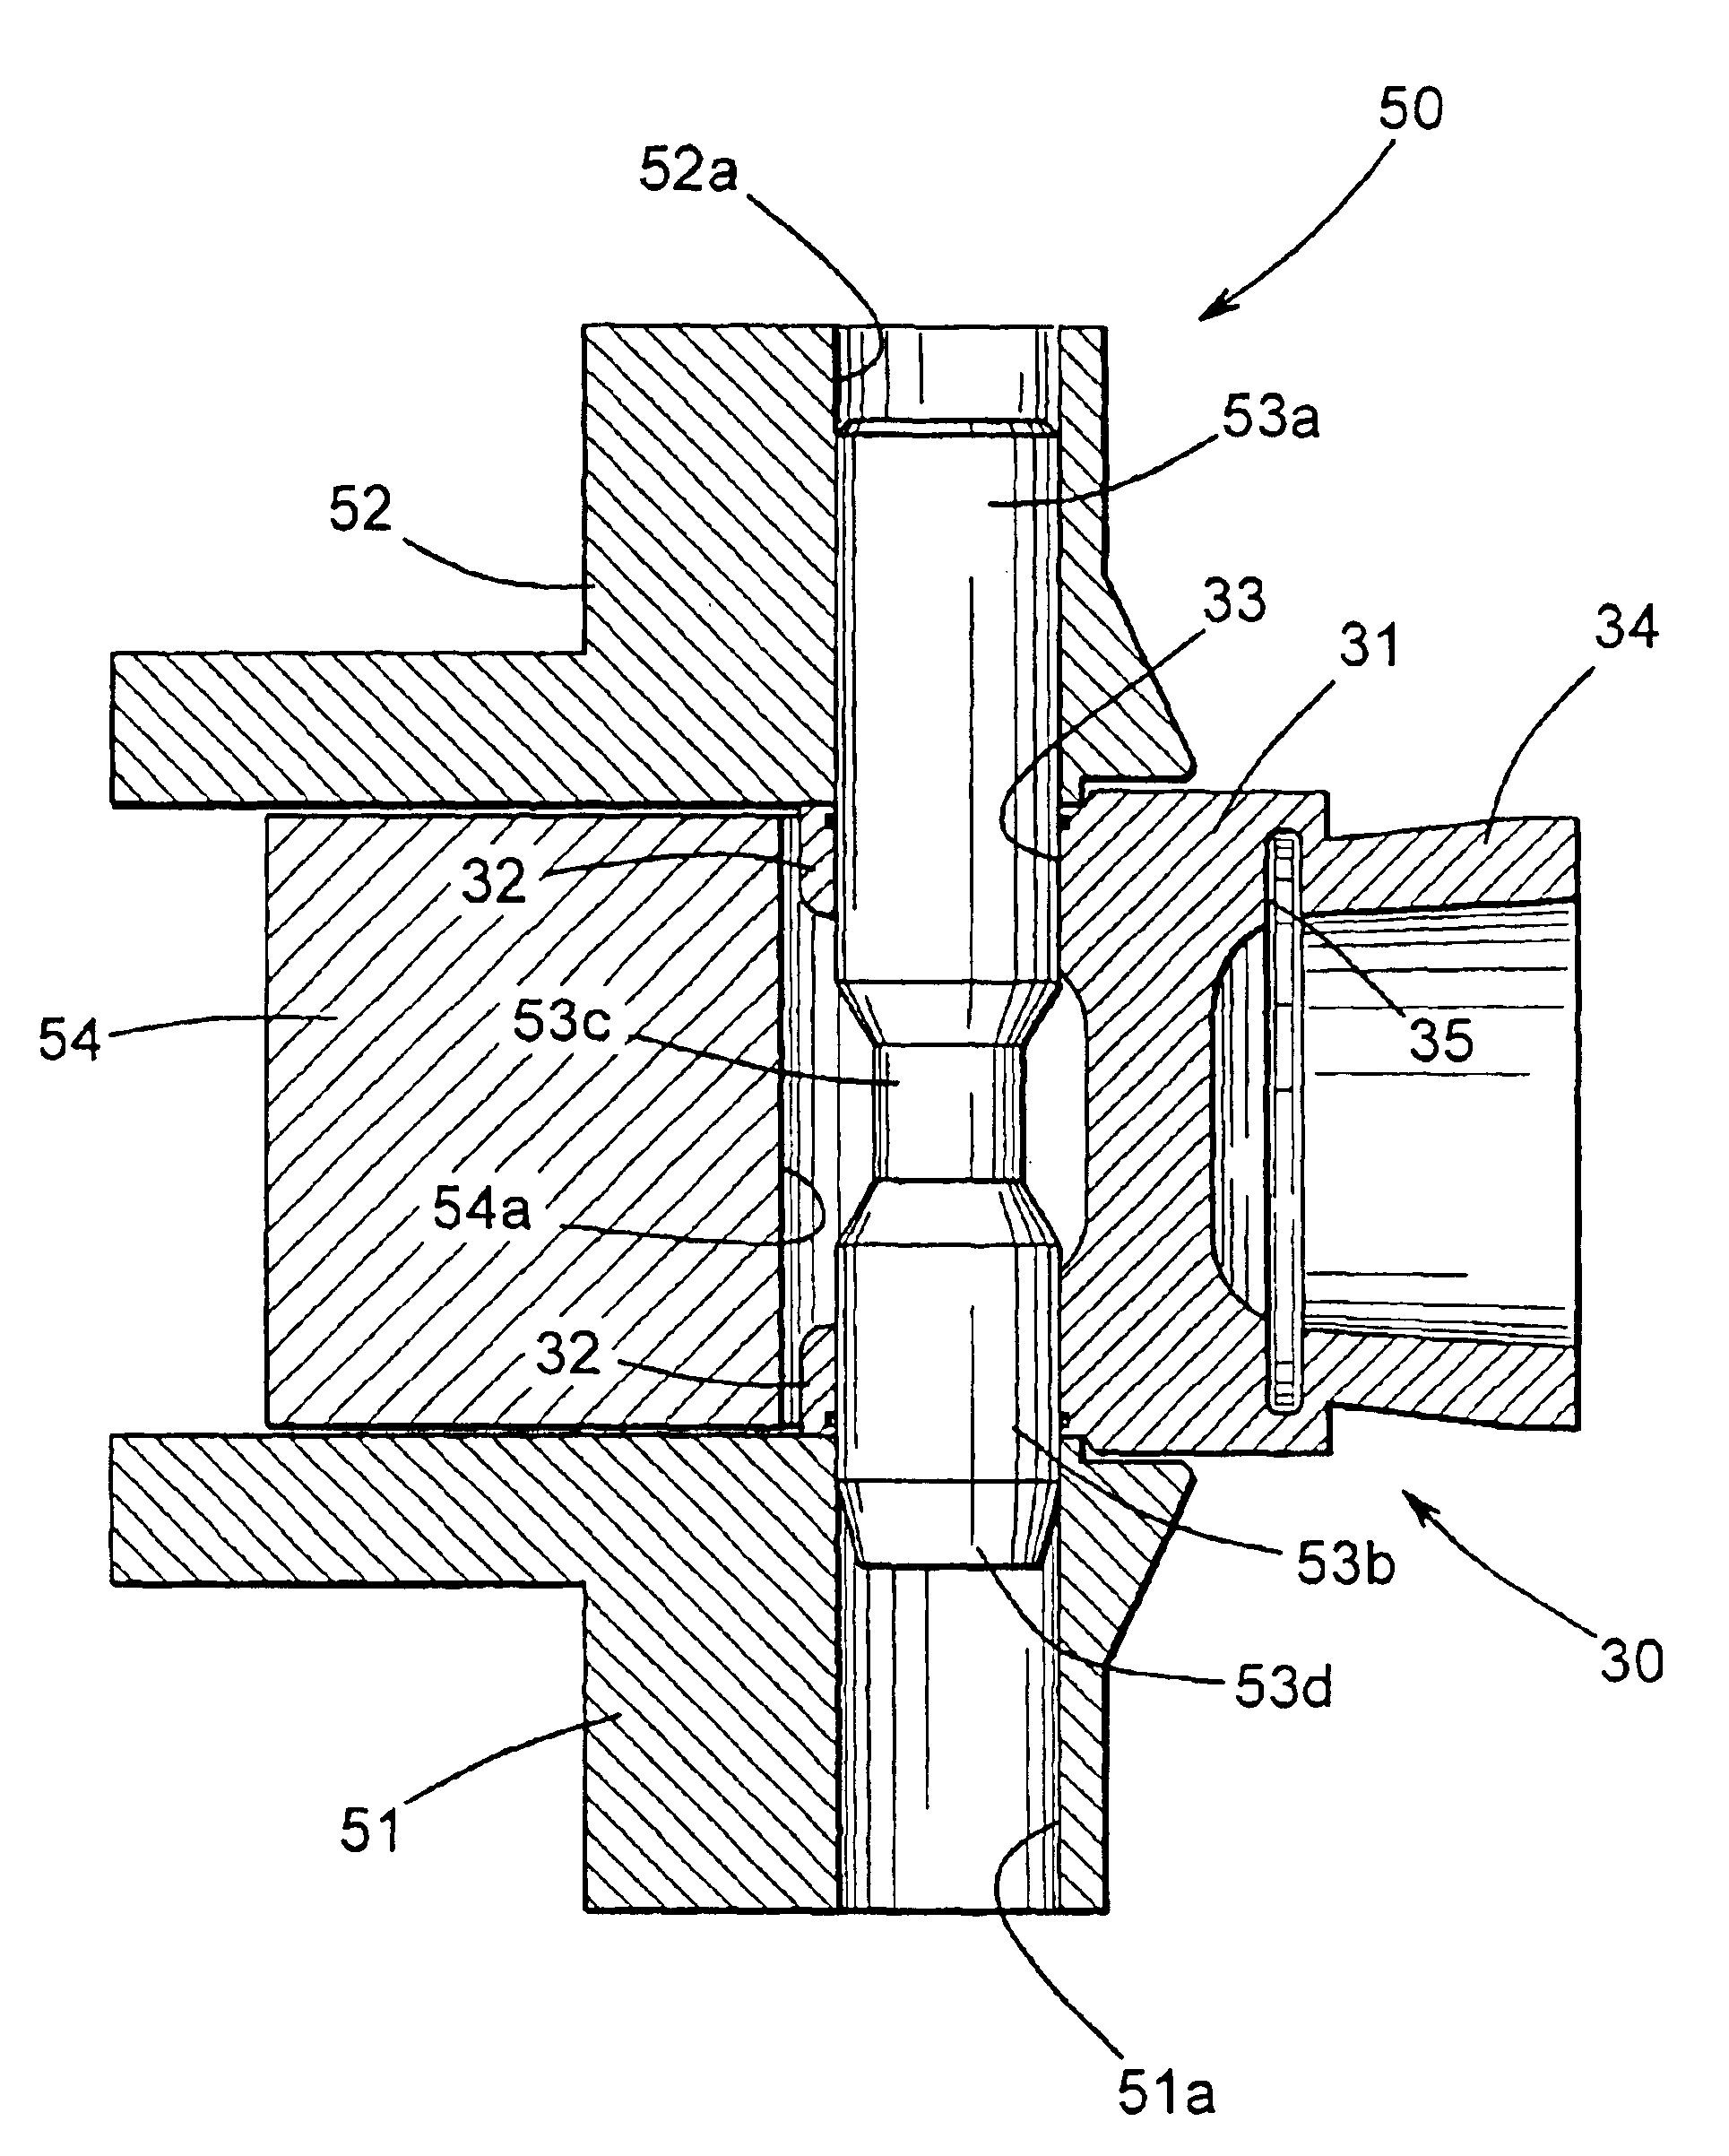 Apparatus for securing a yoke to a tube using magnetic pulse welding techniques